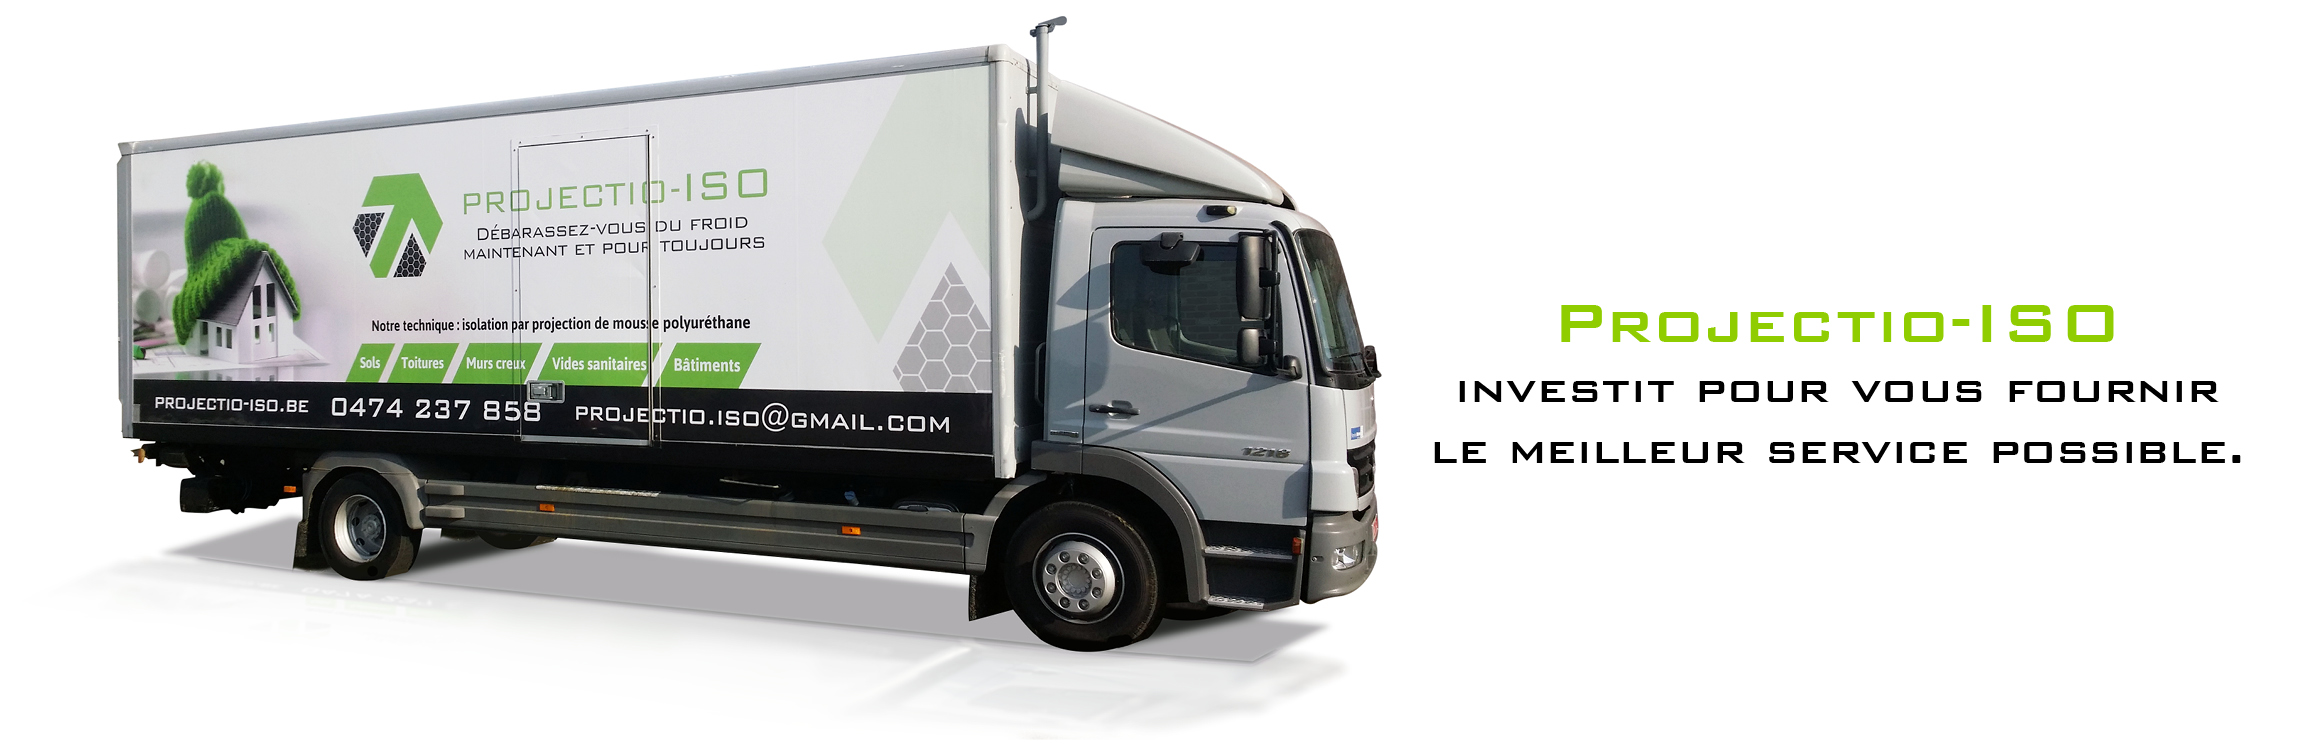 Camion Projectio ISO